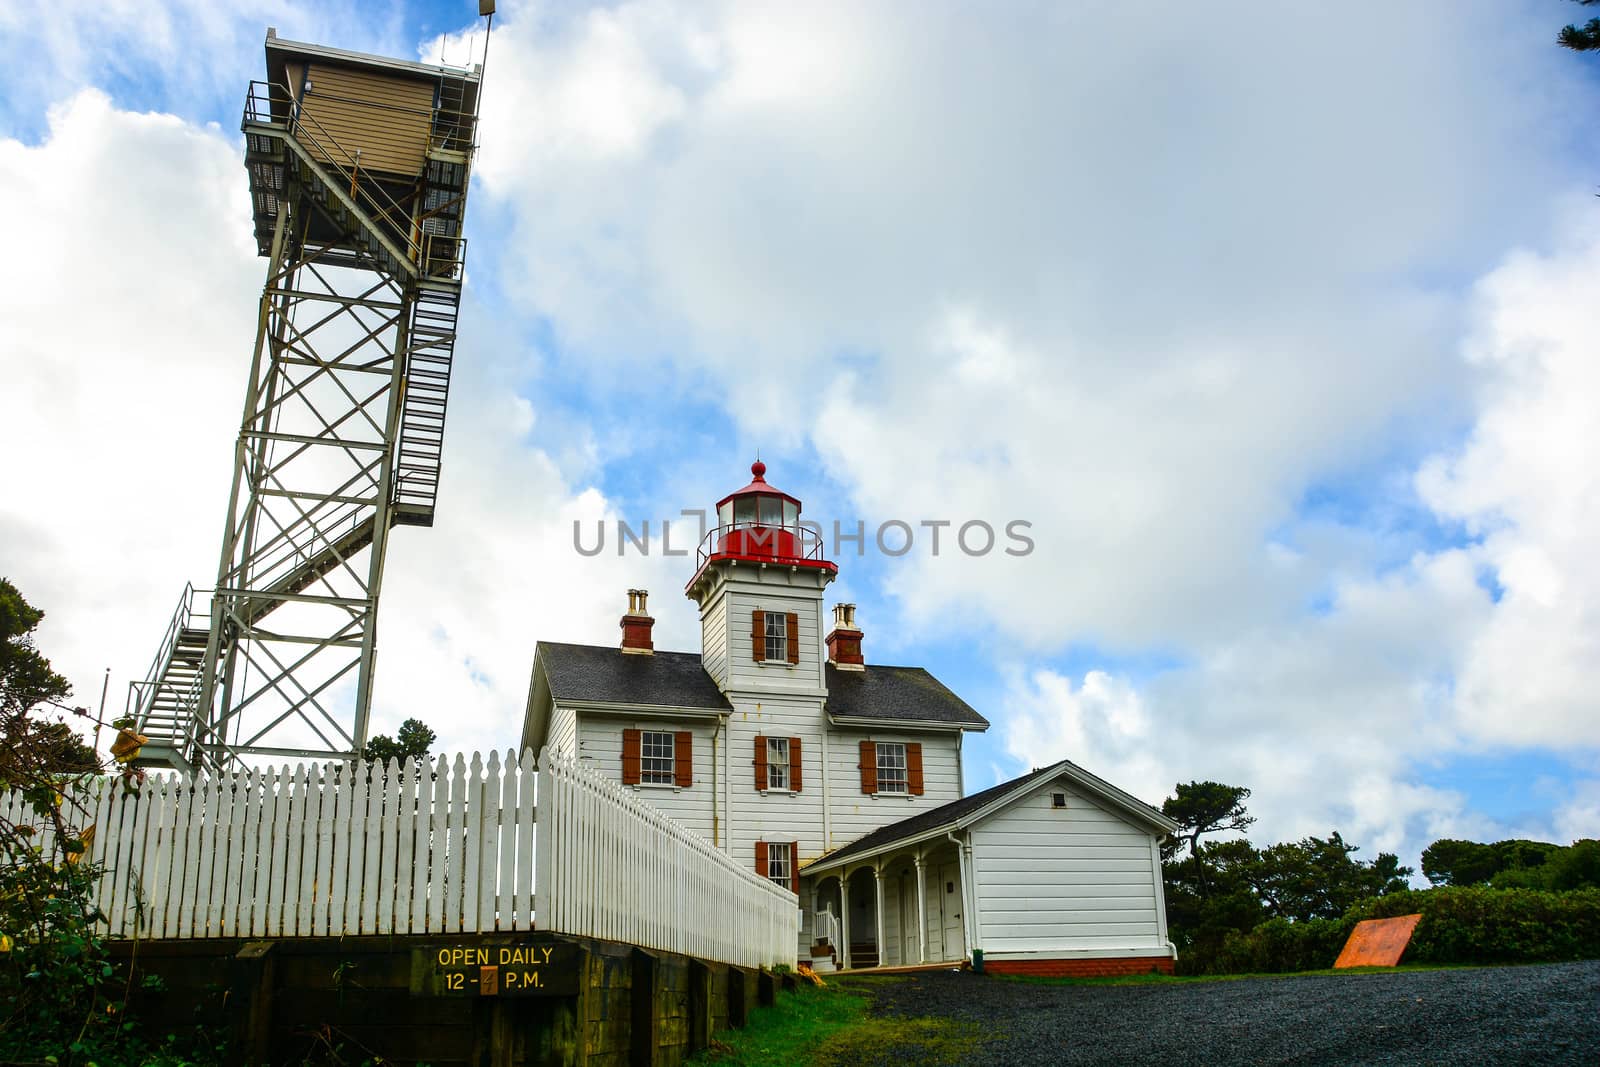 This lighthouse sits on a bluff on Yaquina Head, guarding the entrance to Newport, Oregon.